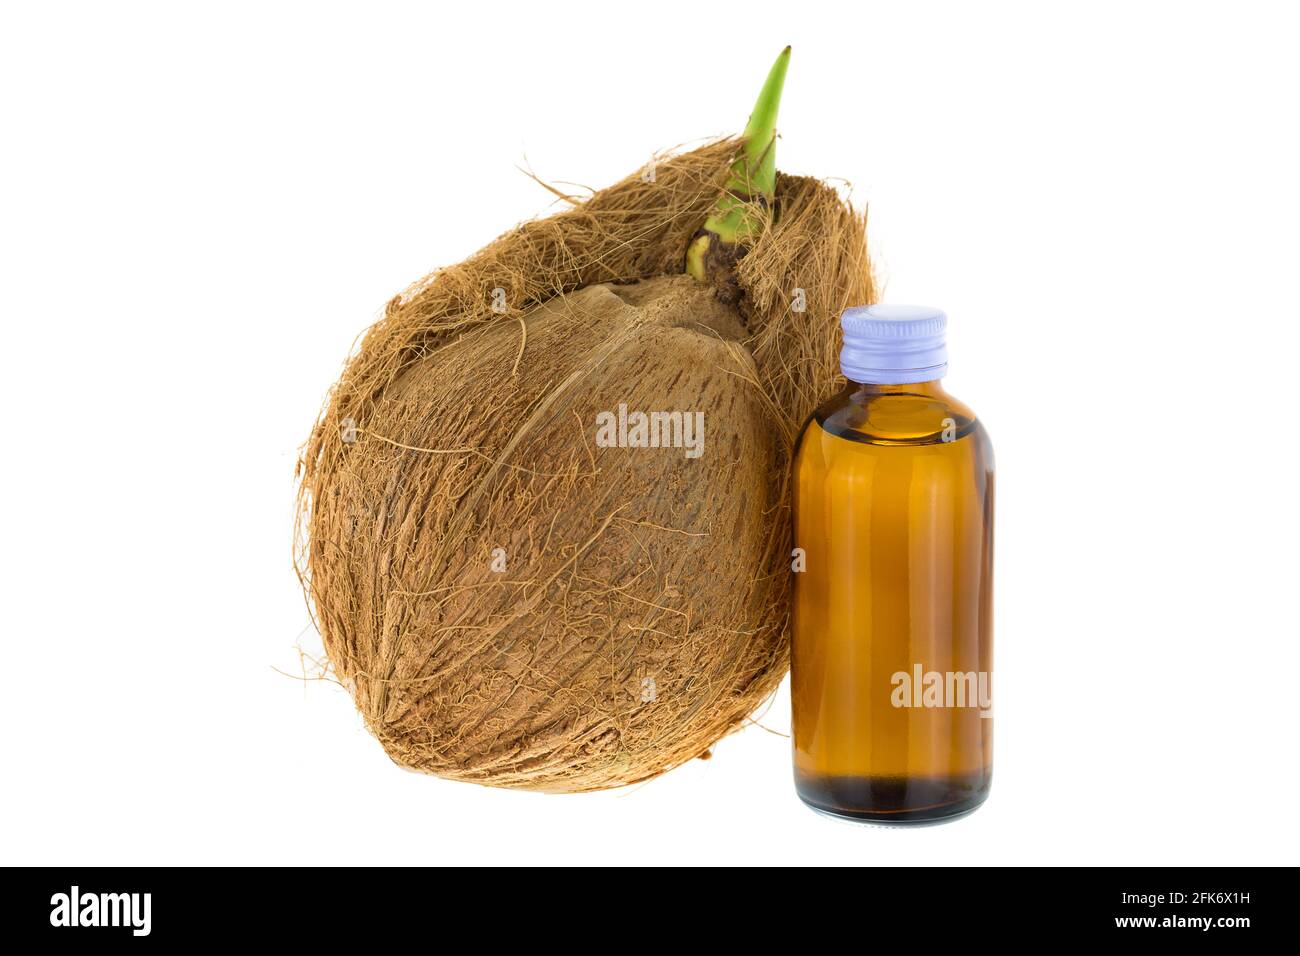 Bottle of Cold pressed coconut oil next to old mature raw coconut shell with brown fiber and green sprout isolated on white background Stock Photo